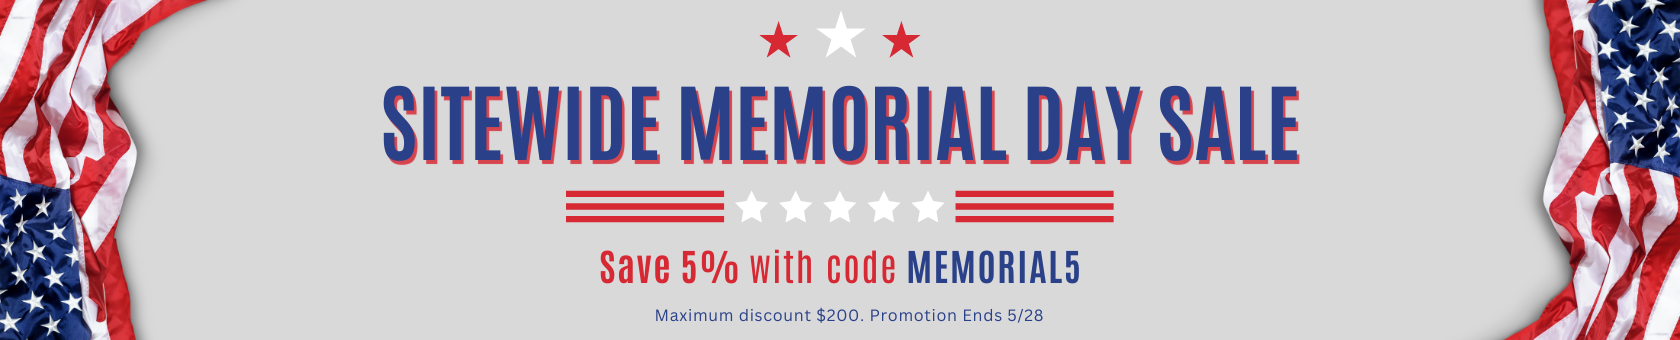 sitewide memorial day sale, save 5% off